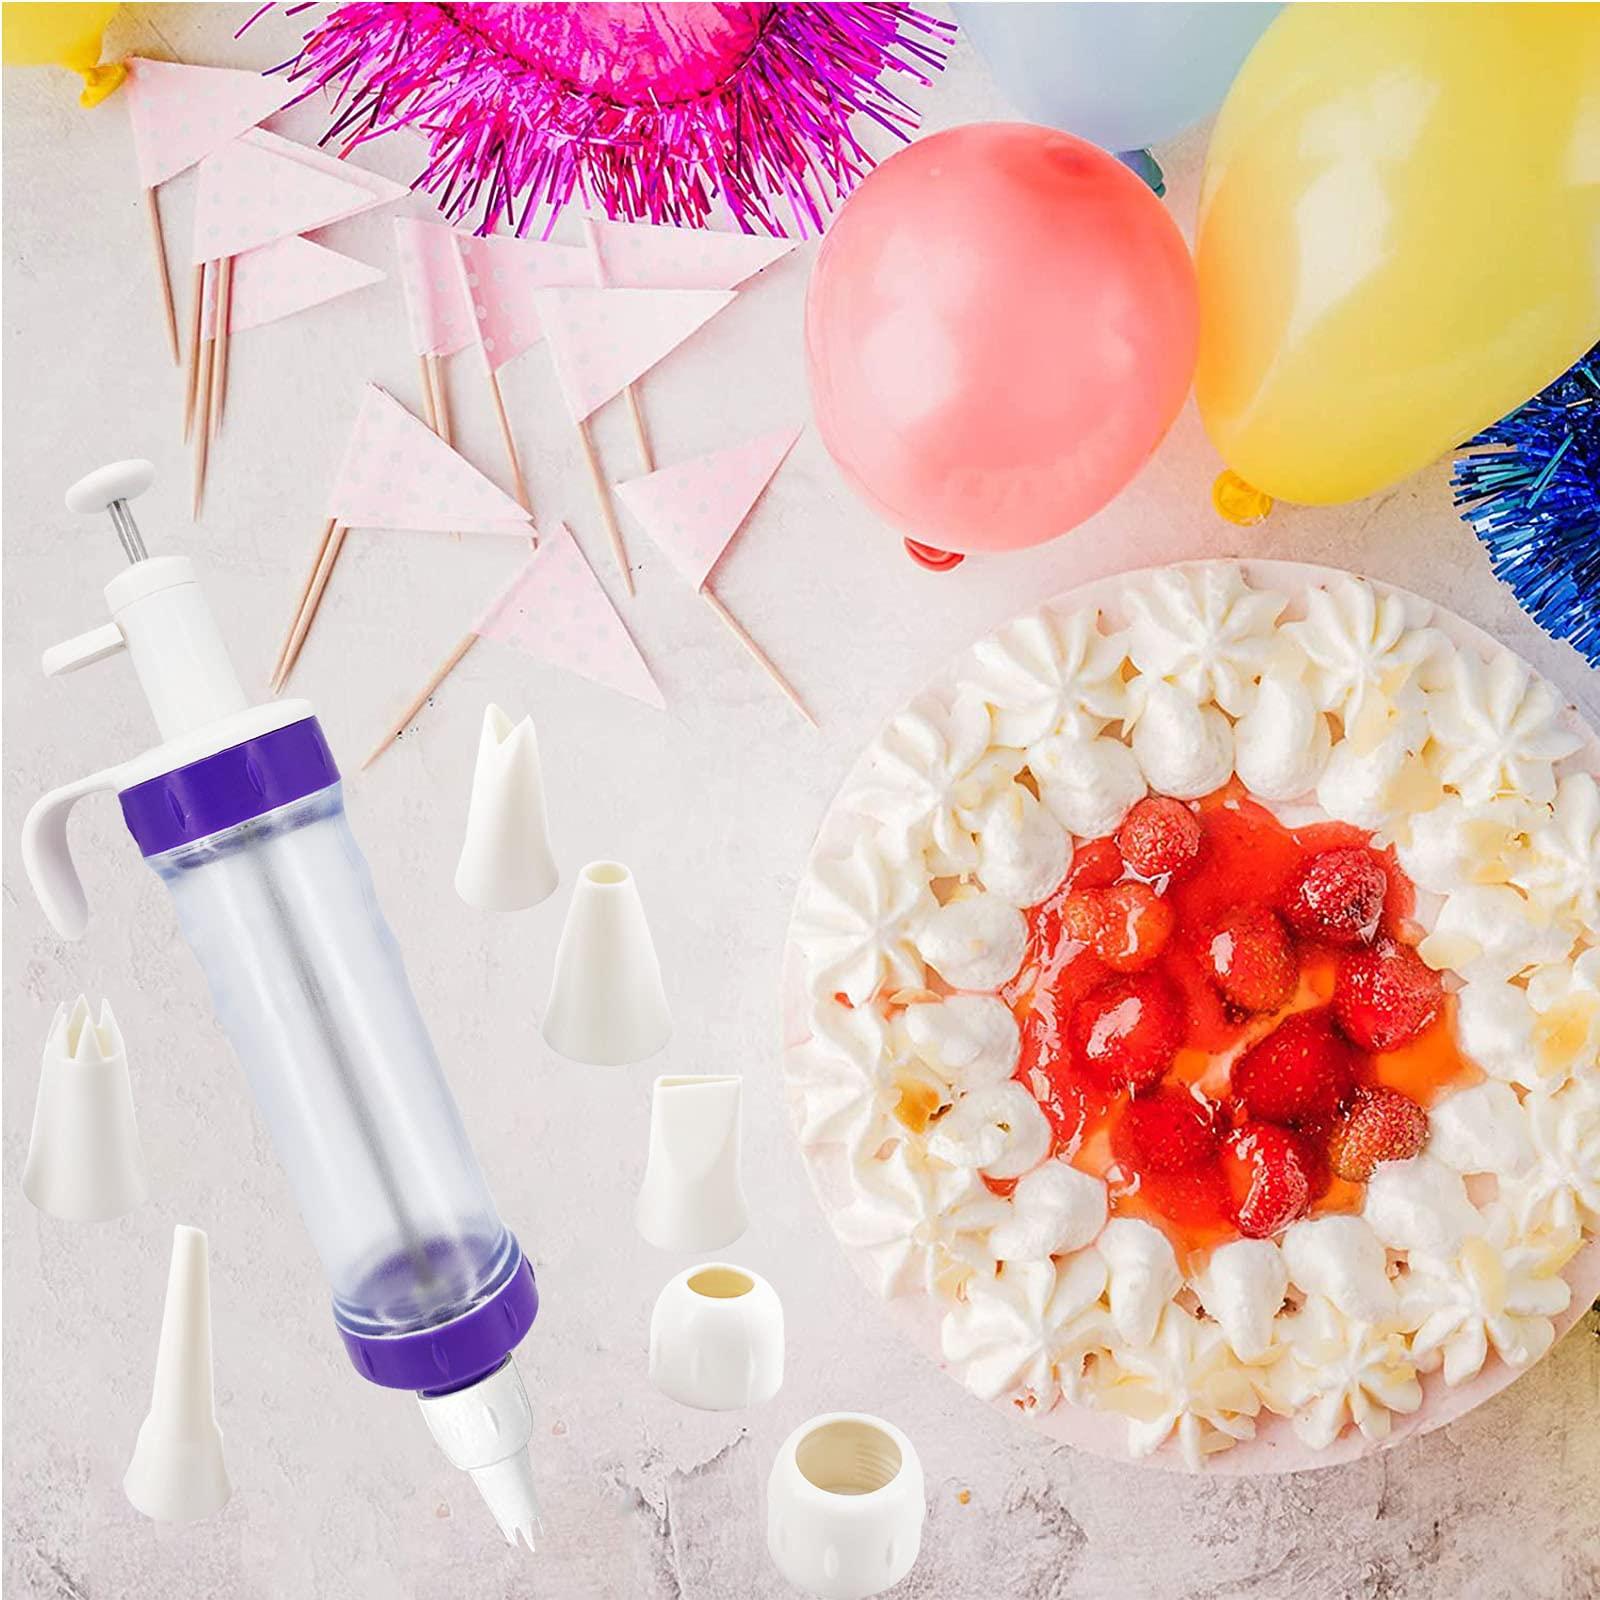 Winbao 15 Pcs Cake Decorating Baking Syringe Tool Kit, Cupcake Filling Injector with Icing Nozzles Cream Scrapers Nozzle Brush Flower Nail Lifter Scissors Pastry Frosting Gun Piping Kit for Cookies - CookCave